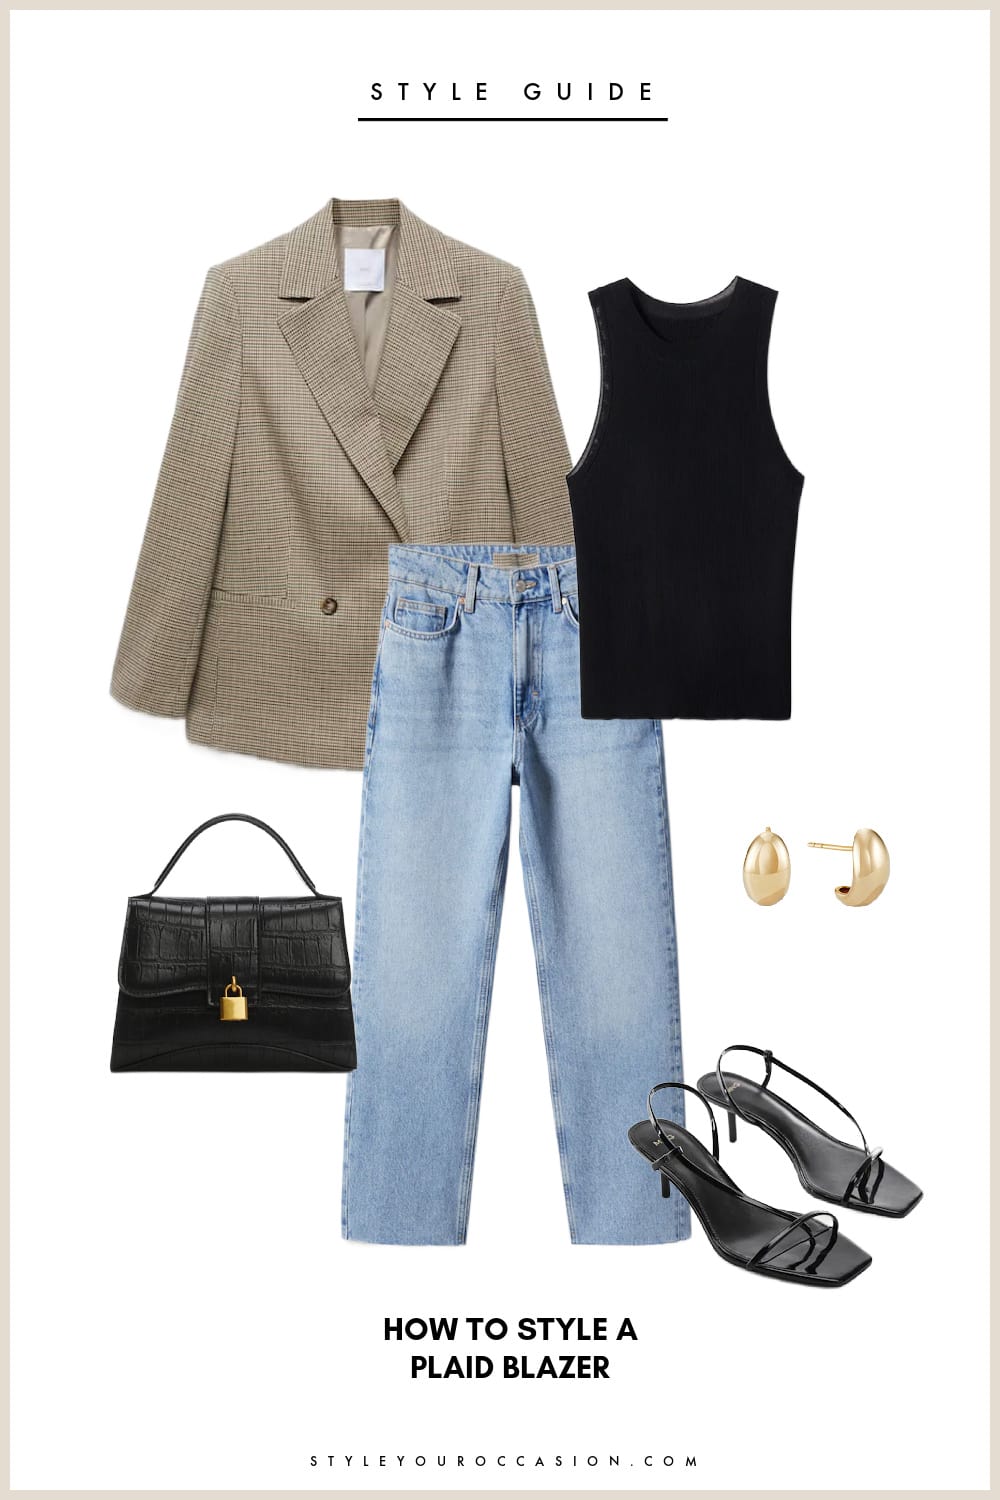 Flat lay graphic of light wash denim straight leg jeans, a black ribbed tank top, a tan plaid blazer, black strappy sandals, a black top handle handbag and gold hoop earrings.